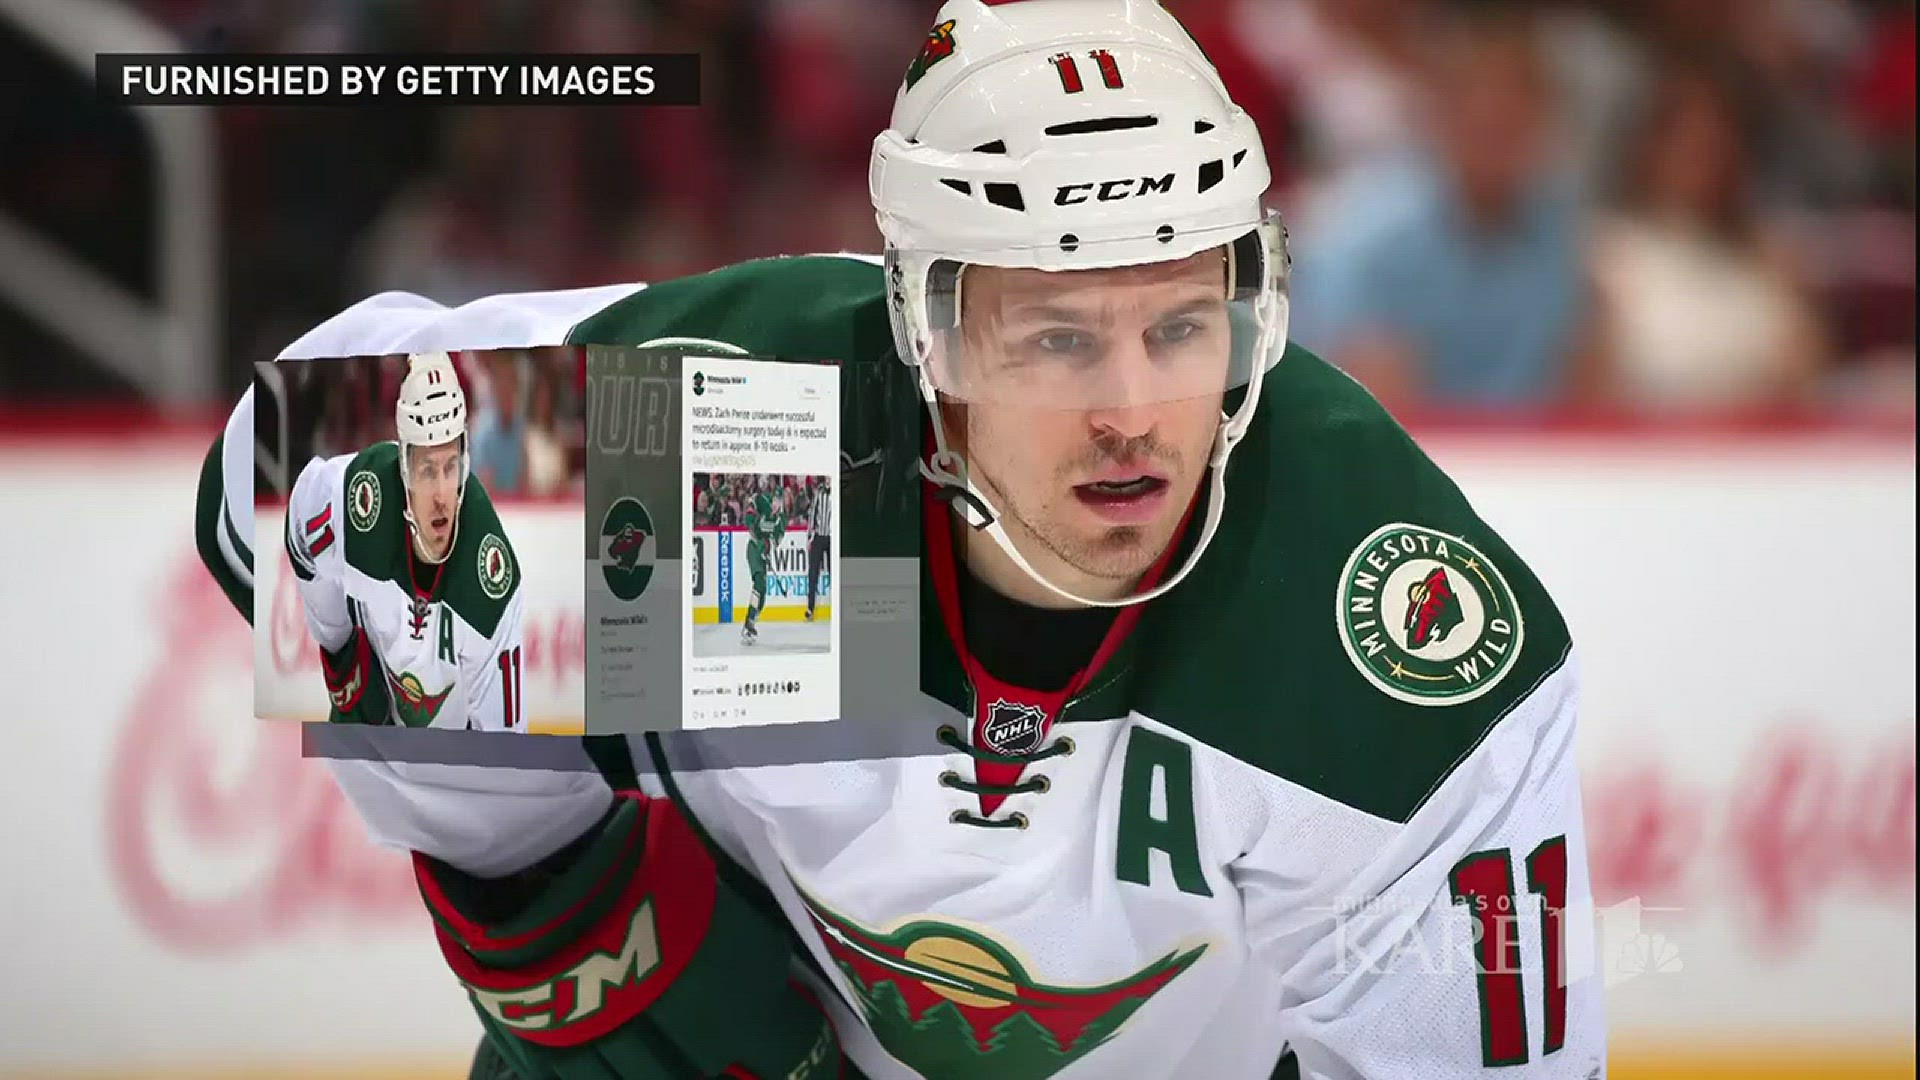 Today, Wild General Manager Chuck Fletcher announced Zach Parise will be out 8-10 weeks after having successful microdiscectomy surgery. What's that? http://kare11.tv/2y1Vqel